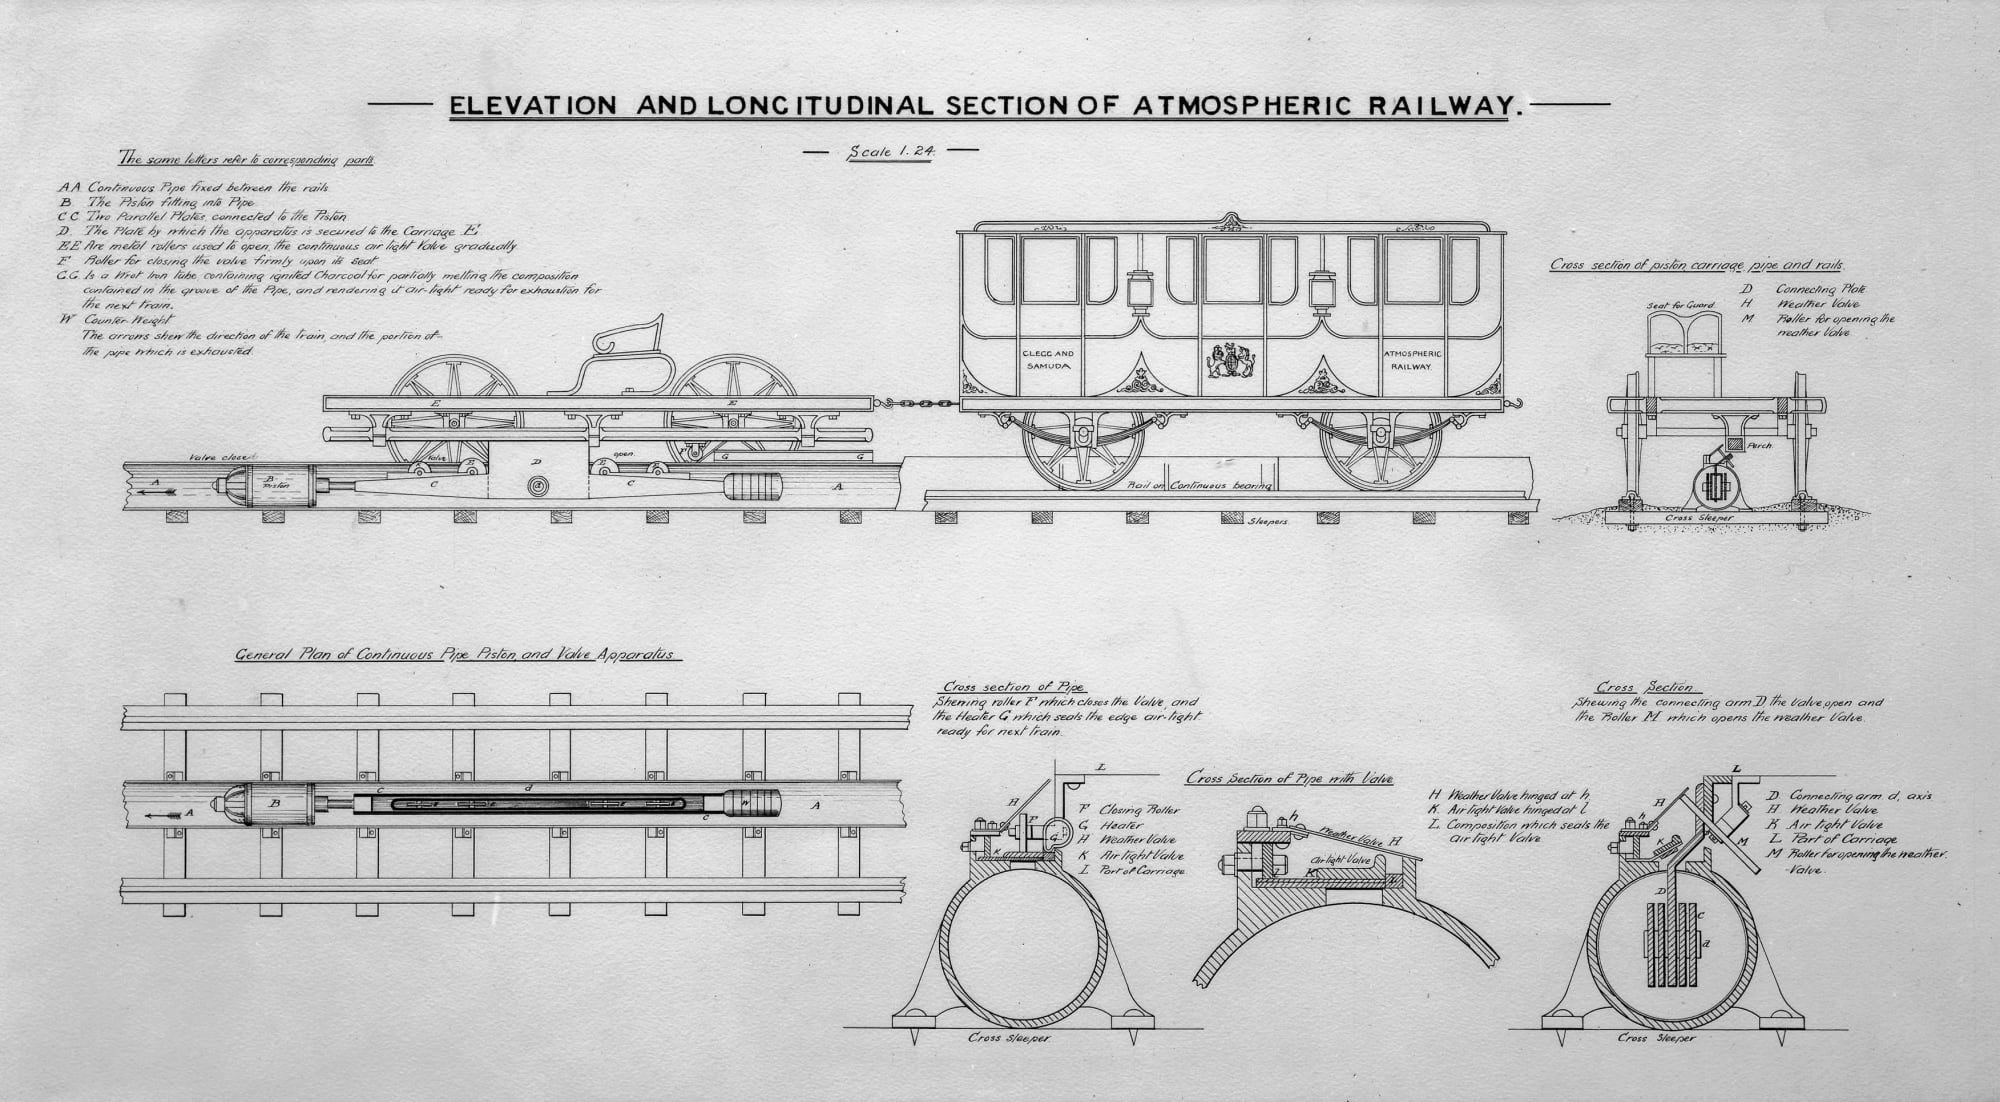 Kingstown & Dalkey Atmospheric Railway attracted interest from leading engineers in the 1840s | Season 2 – Episode 16